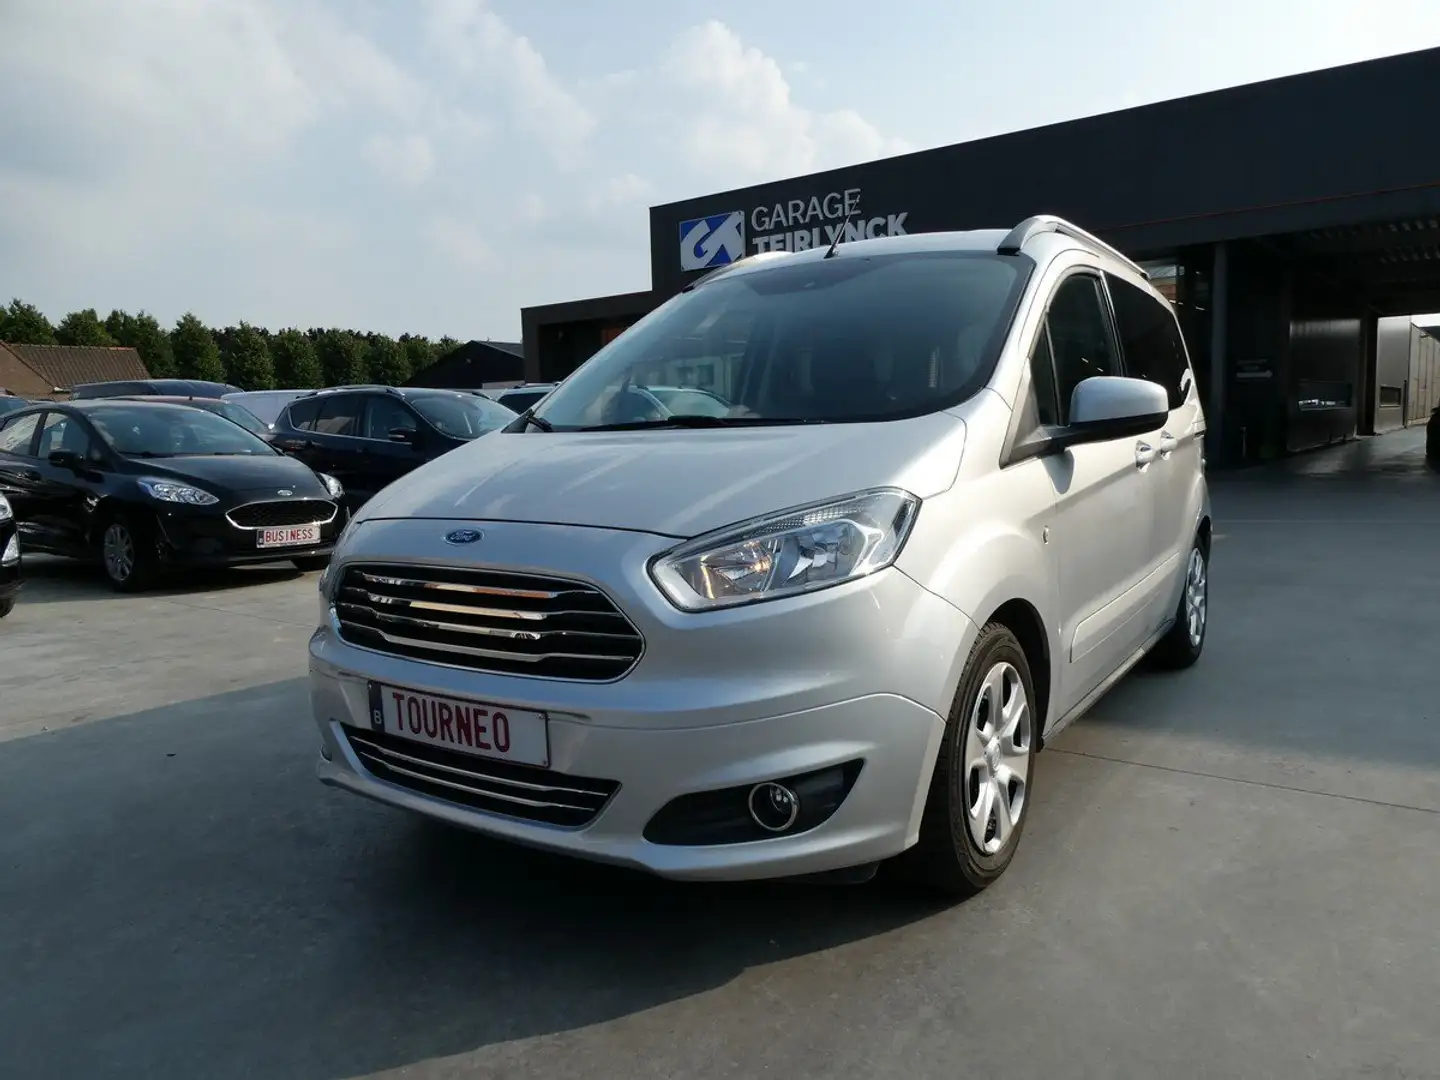 Ford Tourneo Courier 1.6 TDCi 95pk 5plaats LIMITED '15 73000km (36418) Zilver - 1